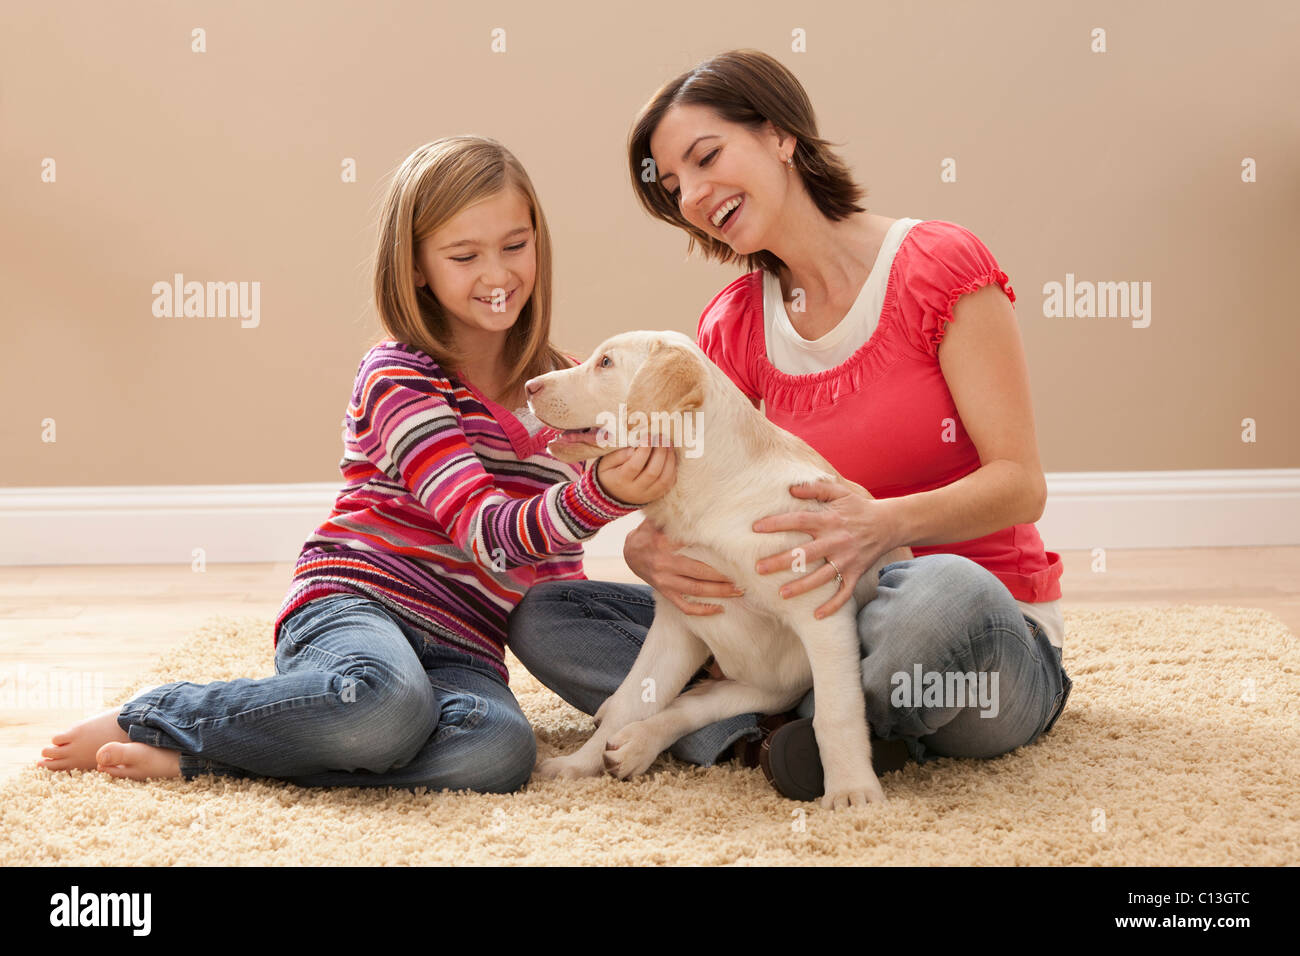 USA, Utah, Lehi, Mother and daughter (10-11) playing with Labrador on carpet Stock Photo